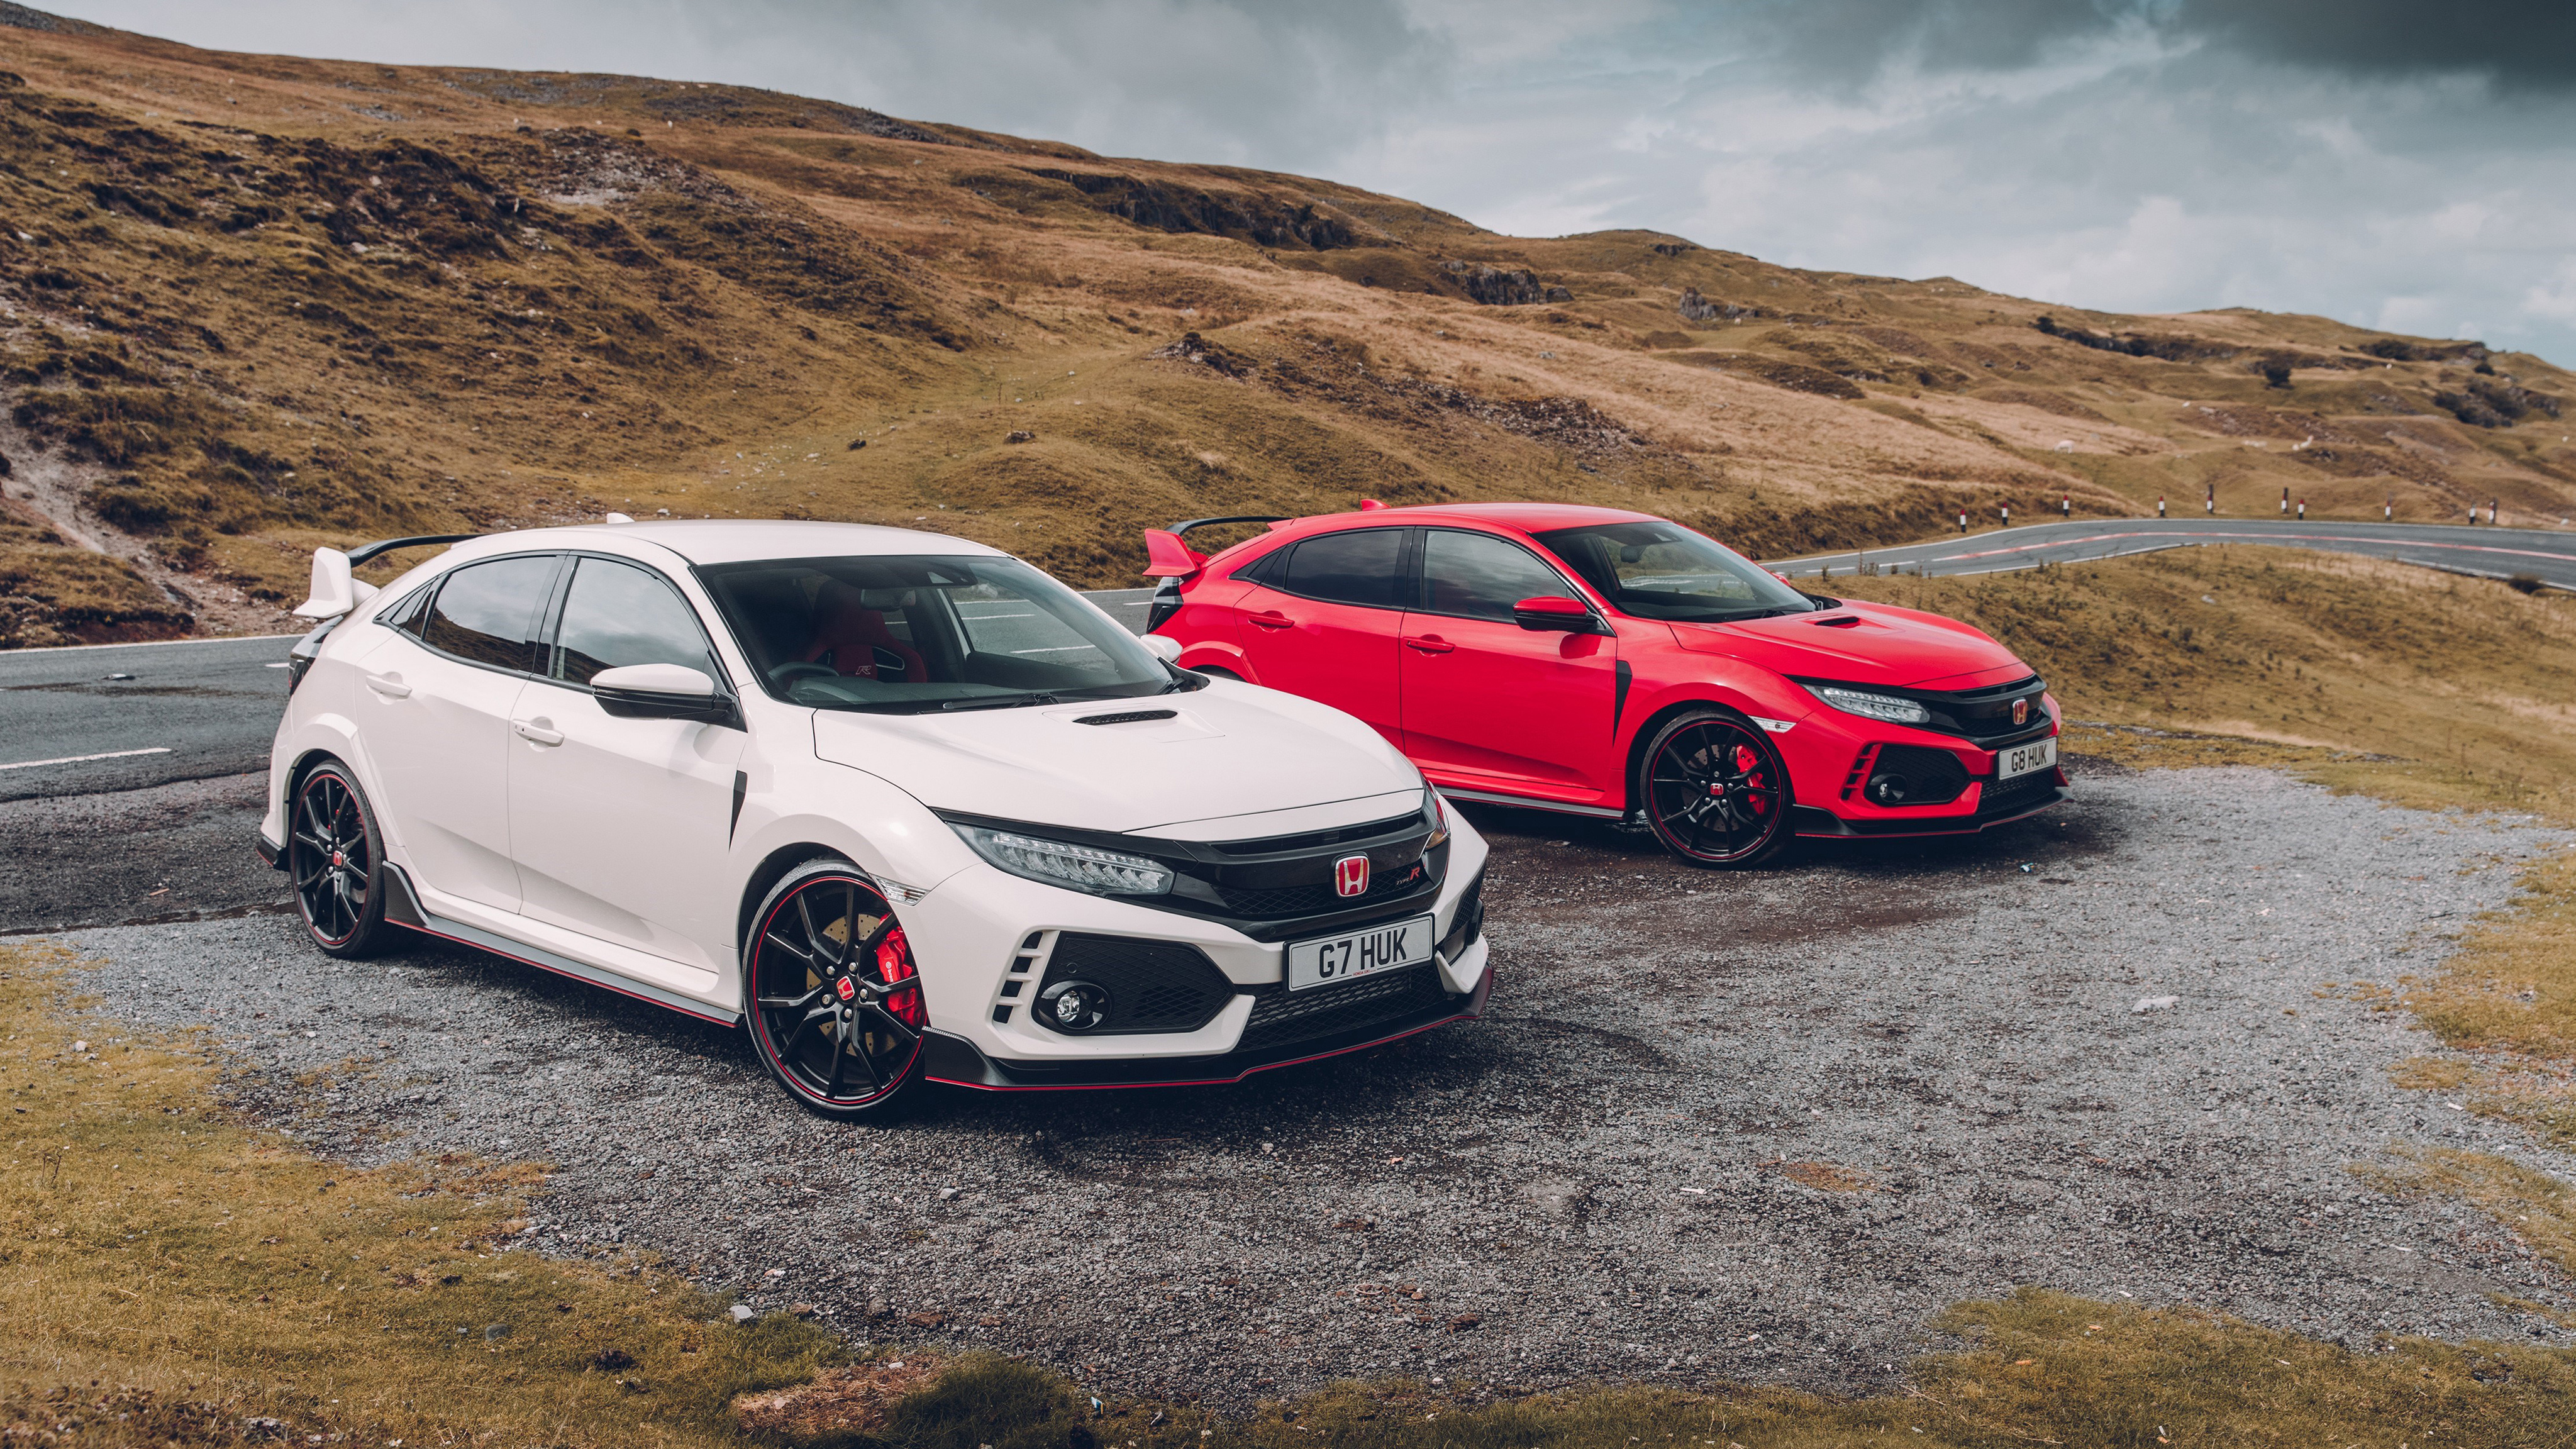 Wallpaper Honda Civic Type R Outlet Off